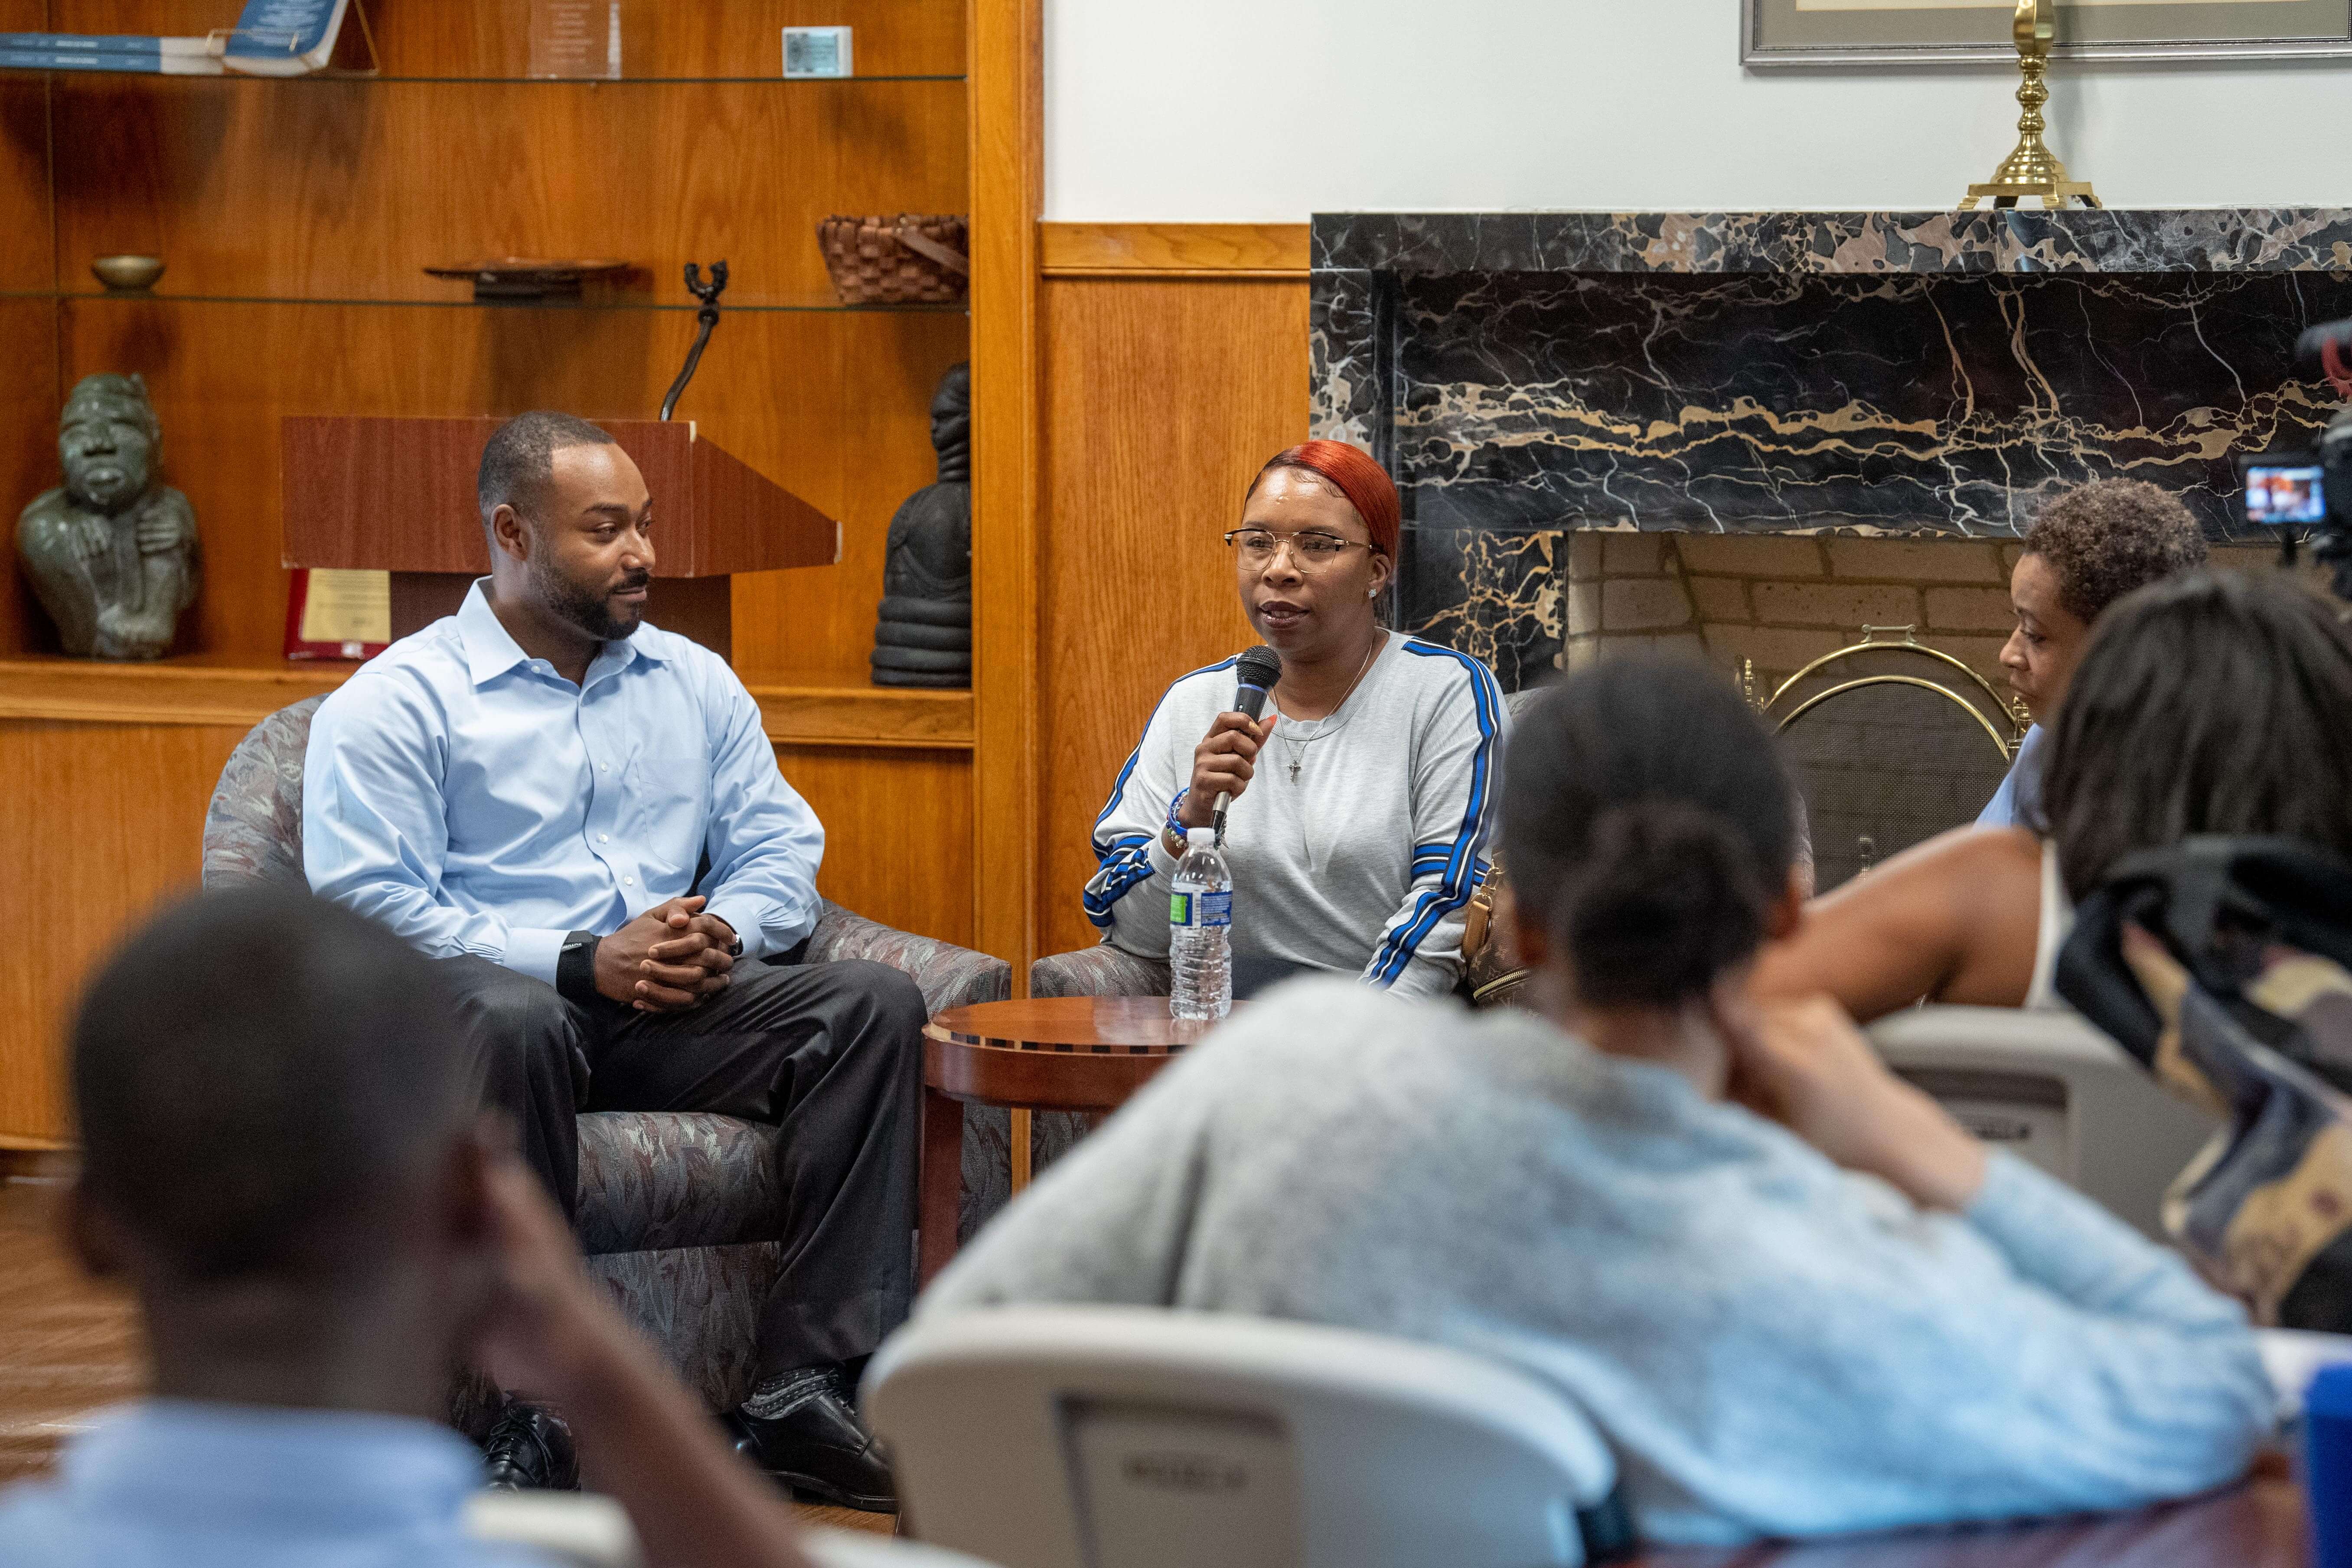 *Featured Image: Justin Hansford and Lezley McSpadden at Howard University School of Law, Source: Howard University